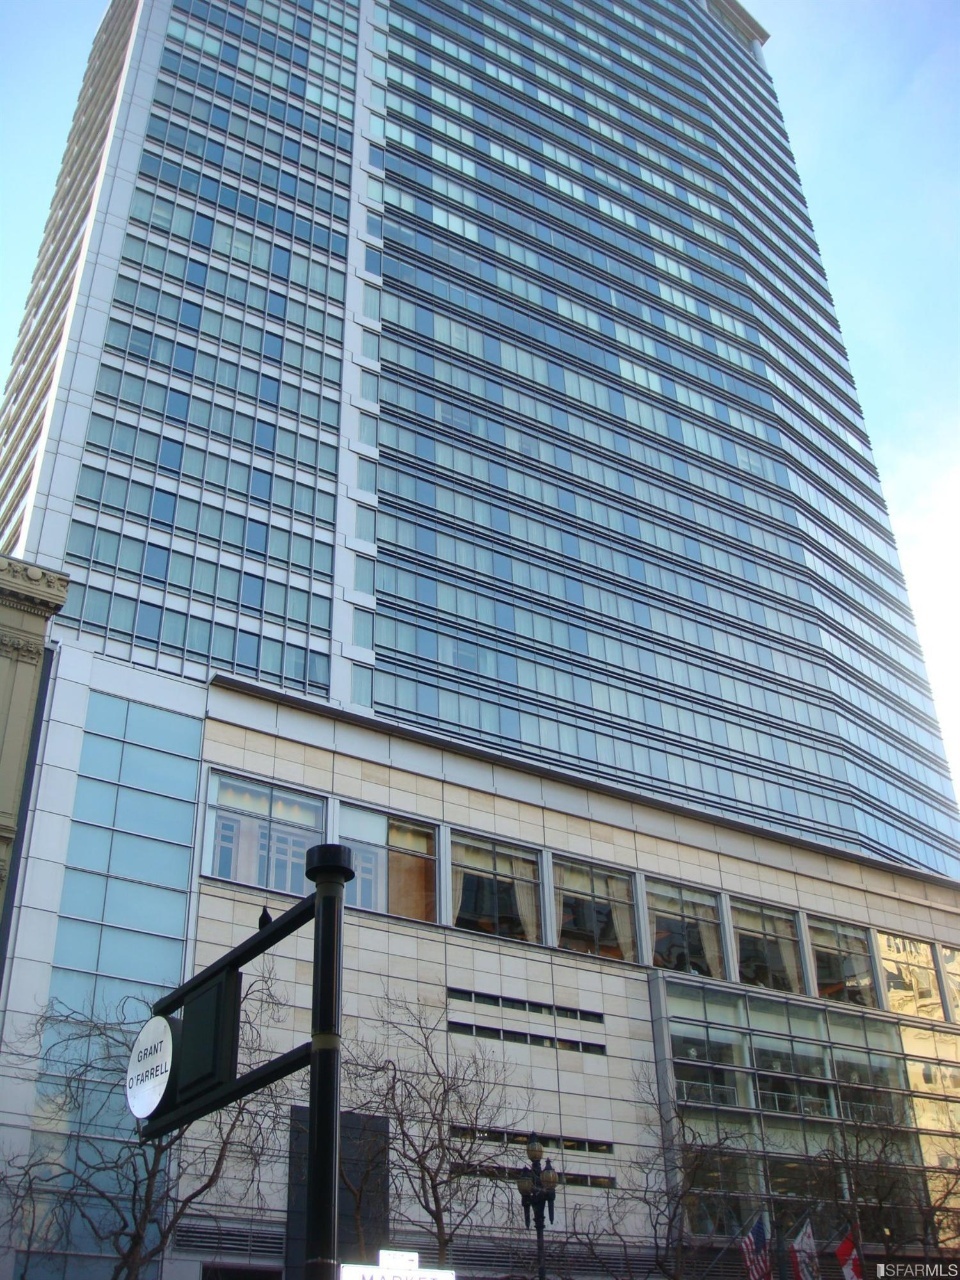 The Four Seasons building on Market Street from street level